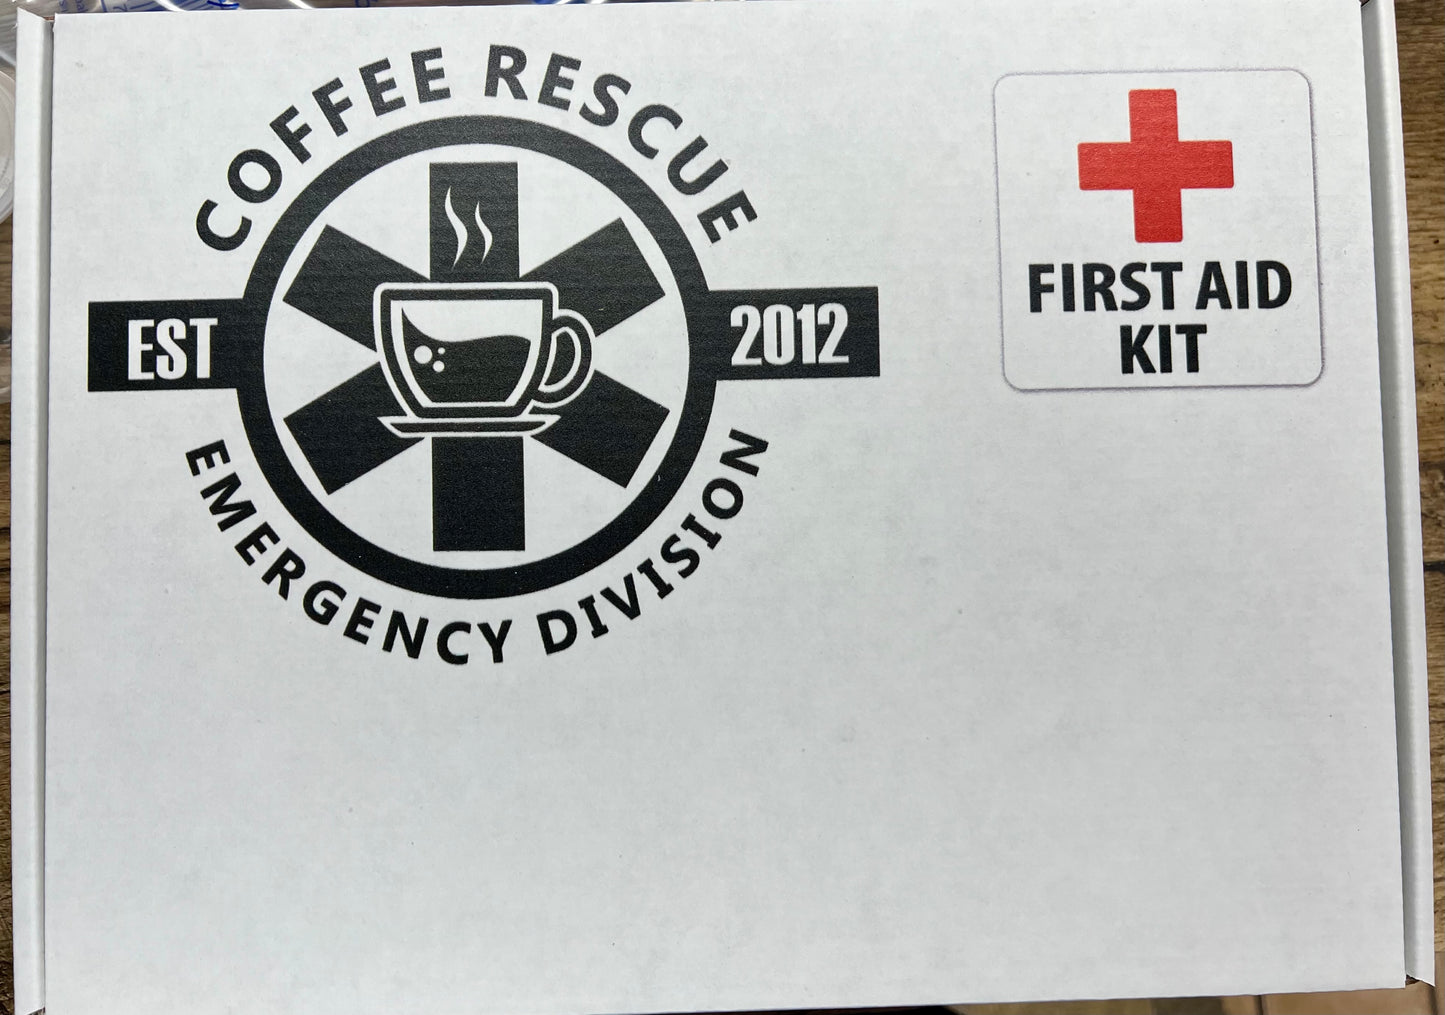 24 Pack K-Cup Variety Pack “First Aid Kit”